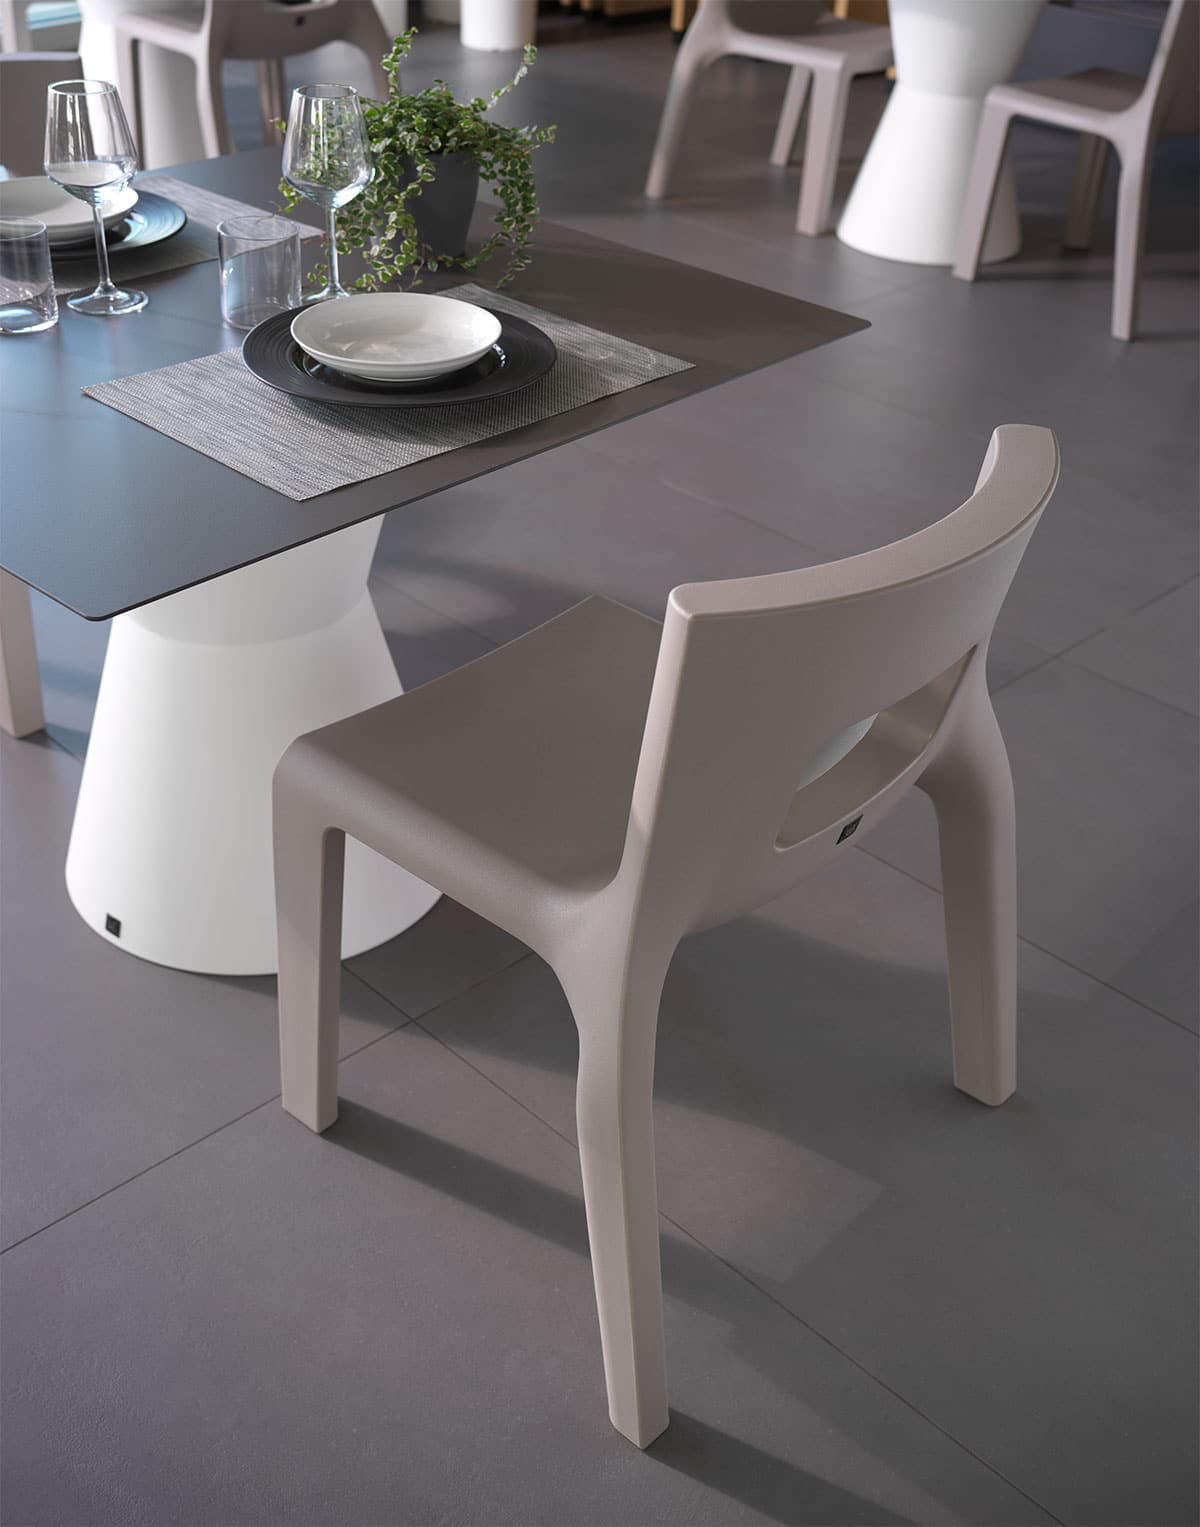 Mise en situation chaise EOS Taupe & table dot blanche plateau carré anthracite